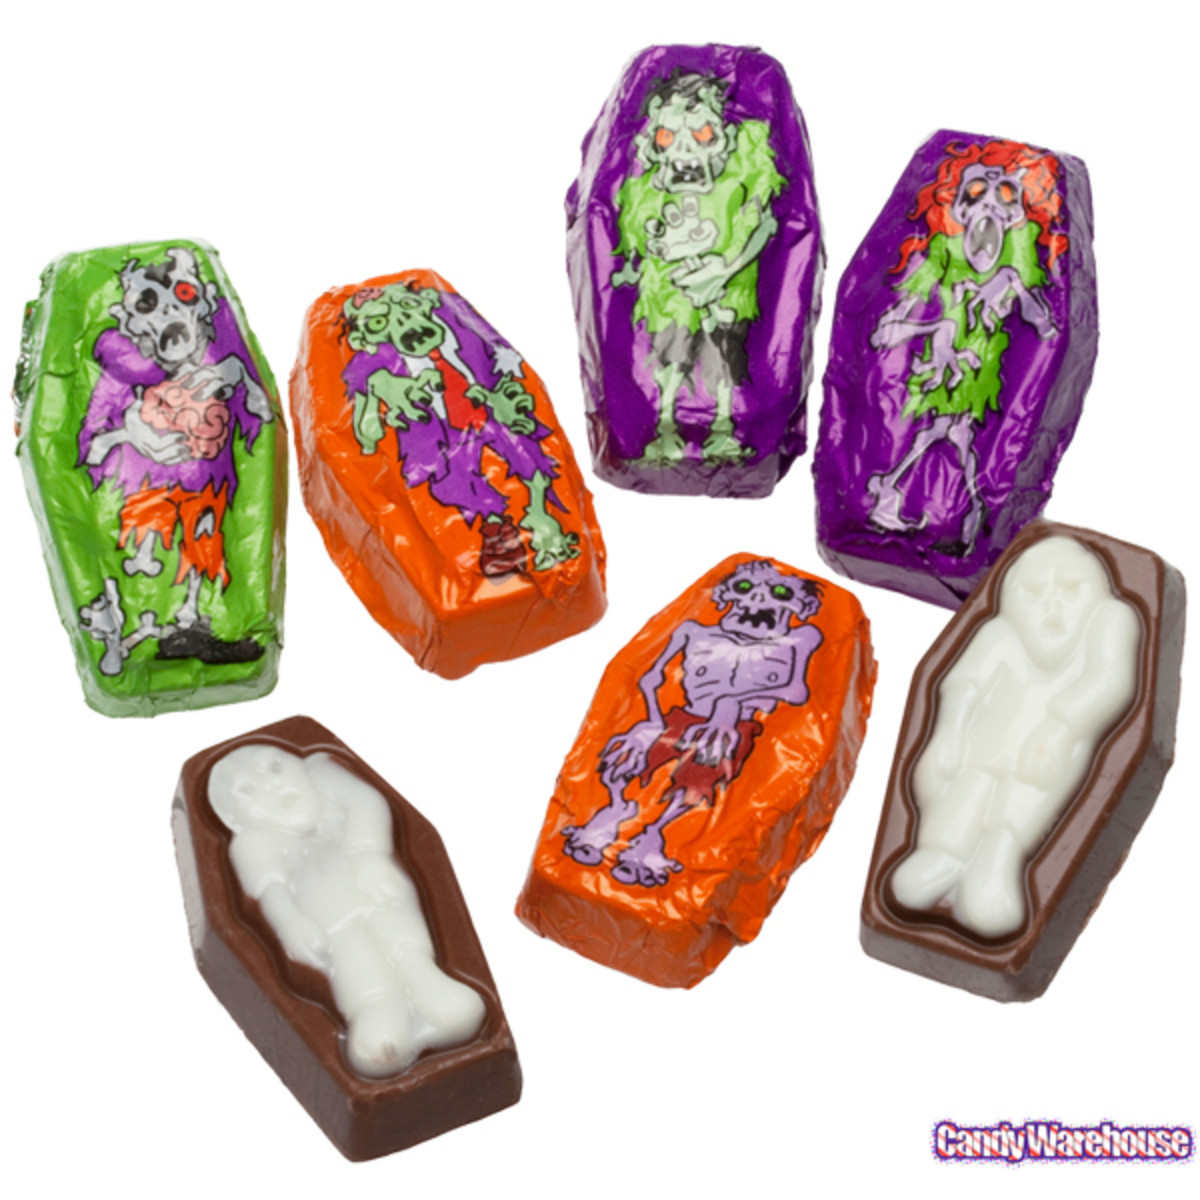 These chocolates look like the living dead...and taste like them too.